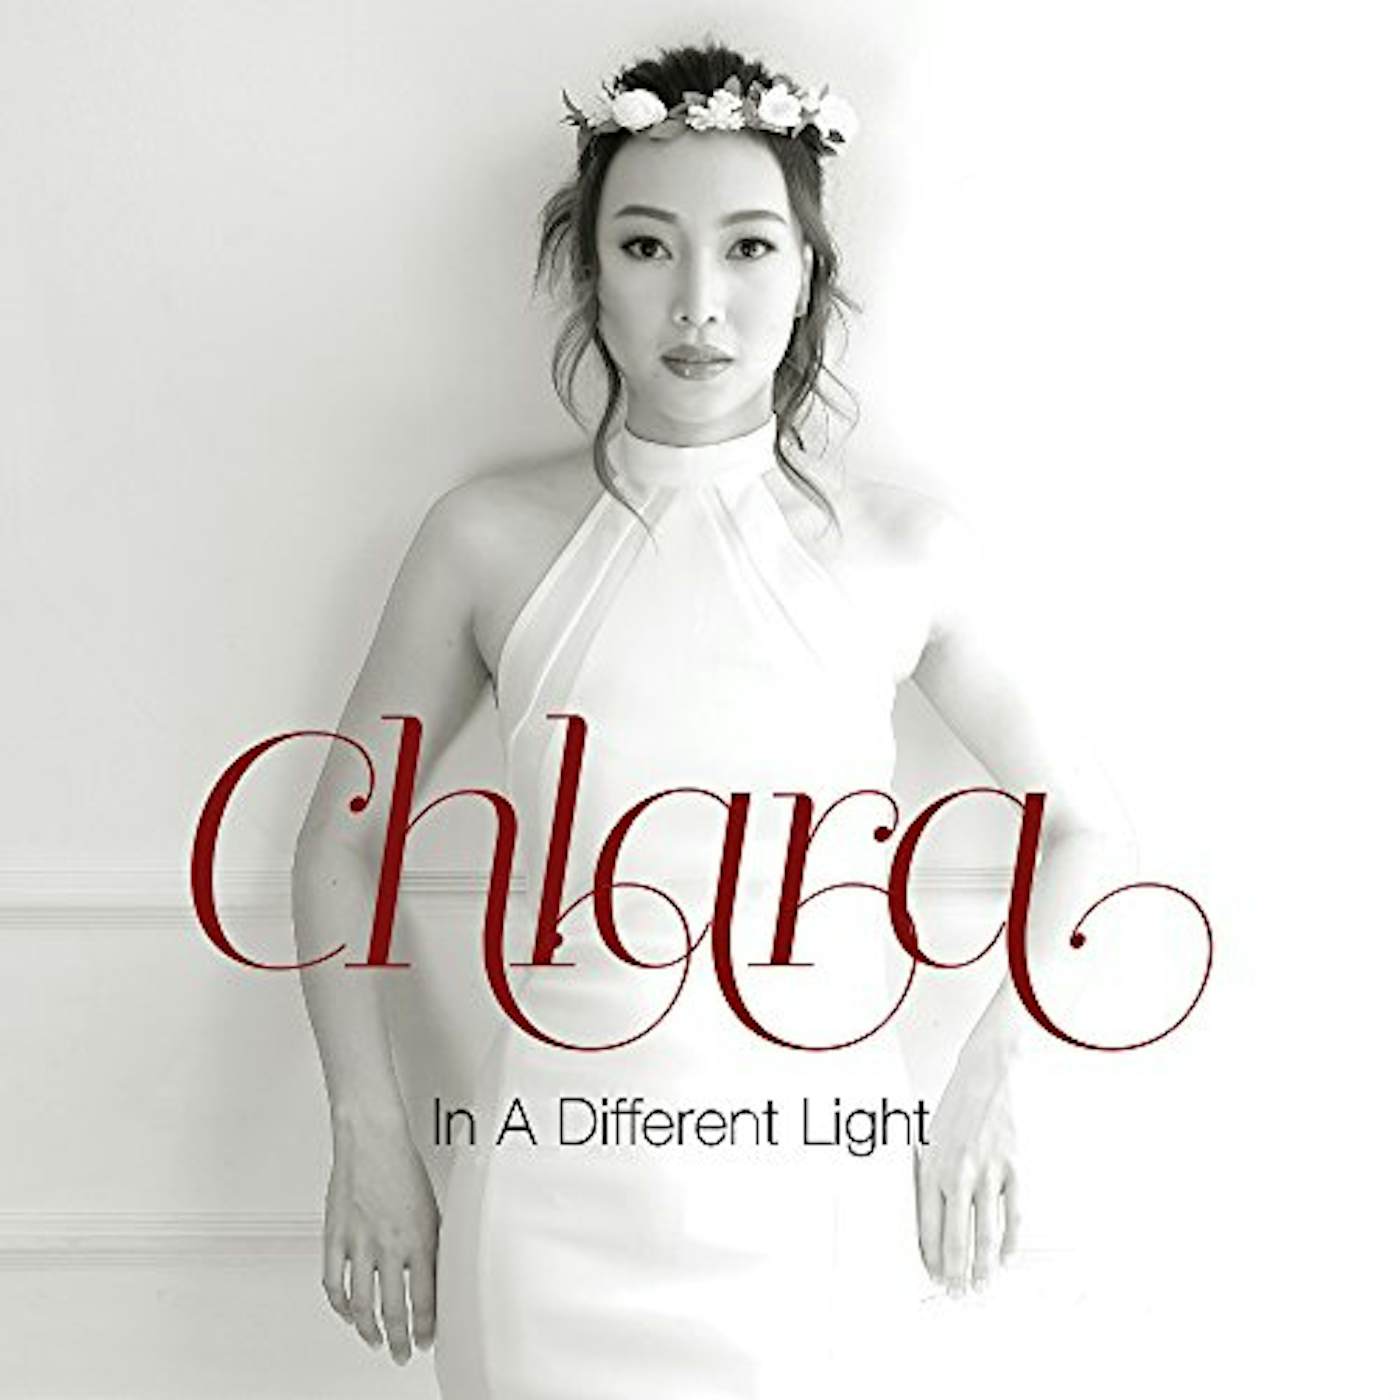 Chlara IN A DIFFERENT LIGHT Super Audio CD